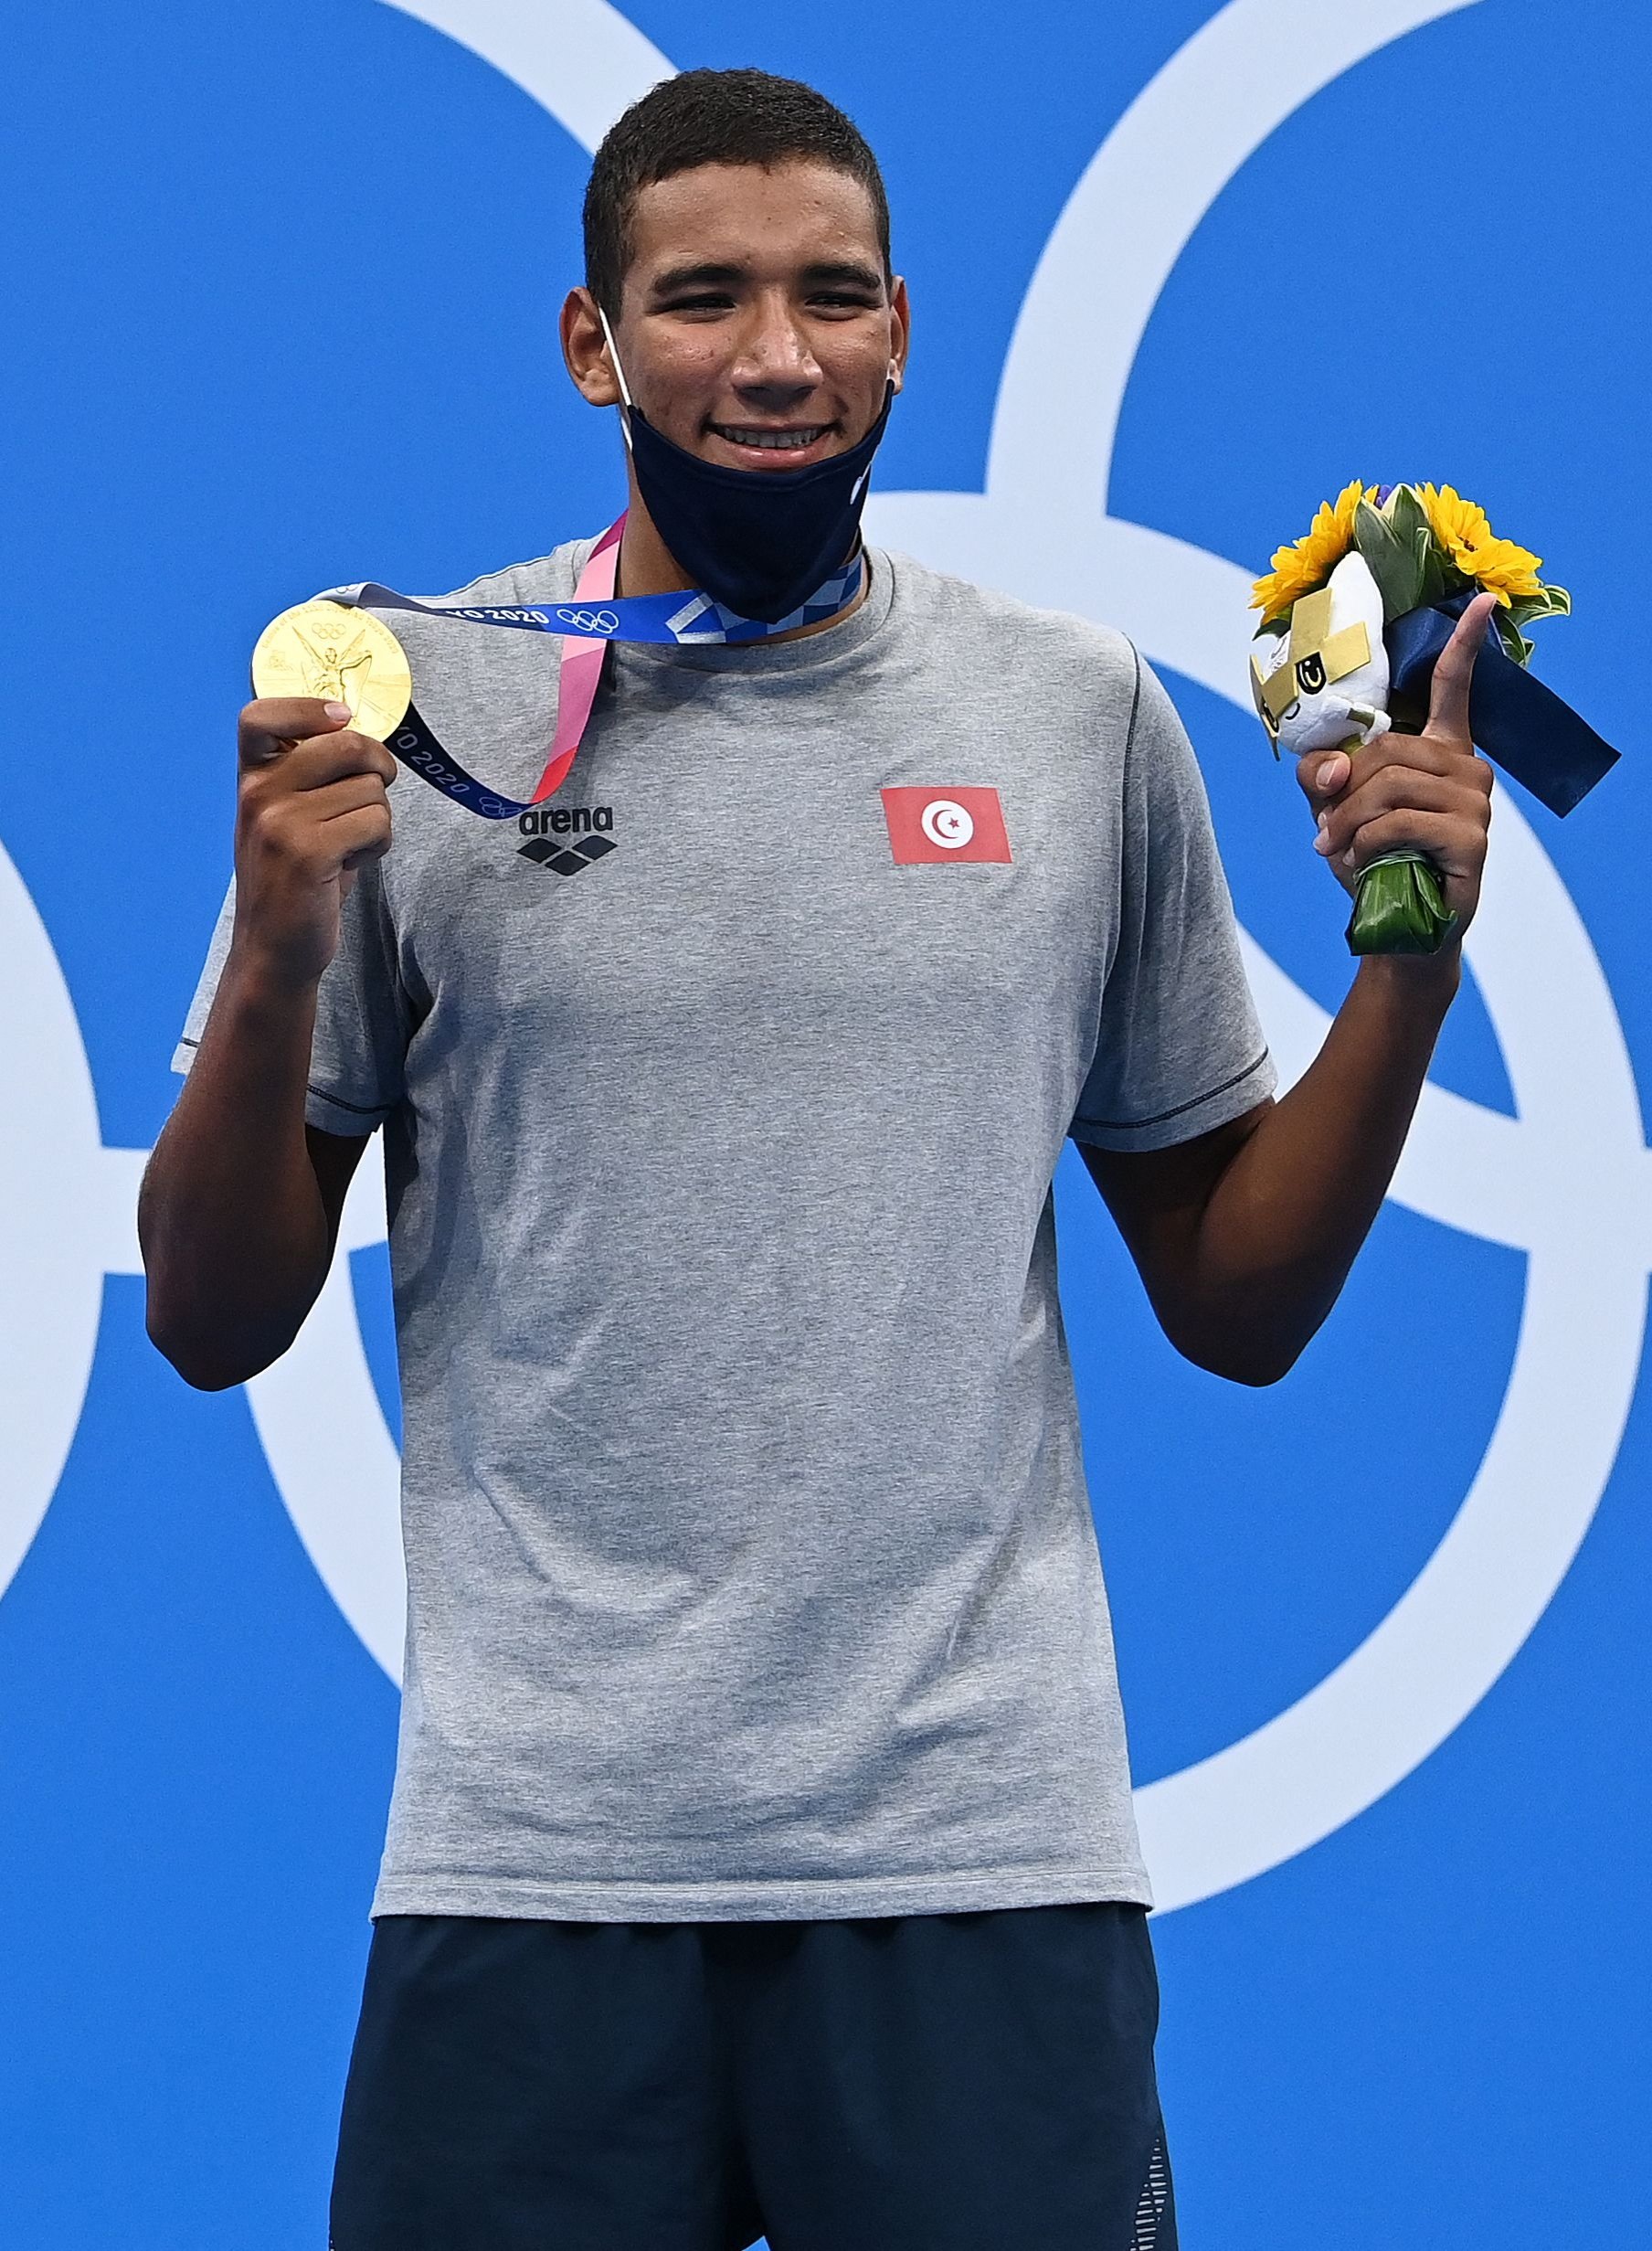 Gold medalist Tunisia's Ahmed Hafnaoui poses with his medal after the final of the men's 400m freestyle swimming event during the Tokyo 2020 Olympic Games at the Tokyo Aquatics Centre in Tokyo, Japan, July 25, 2021. (AFP Photo)